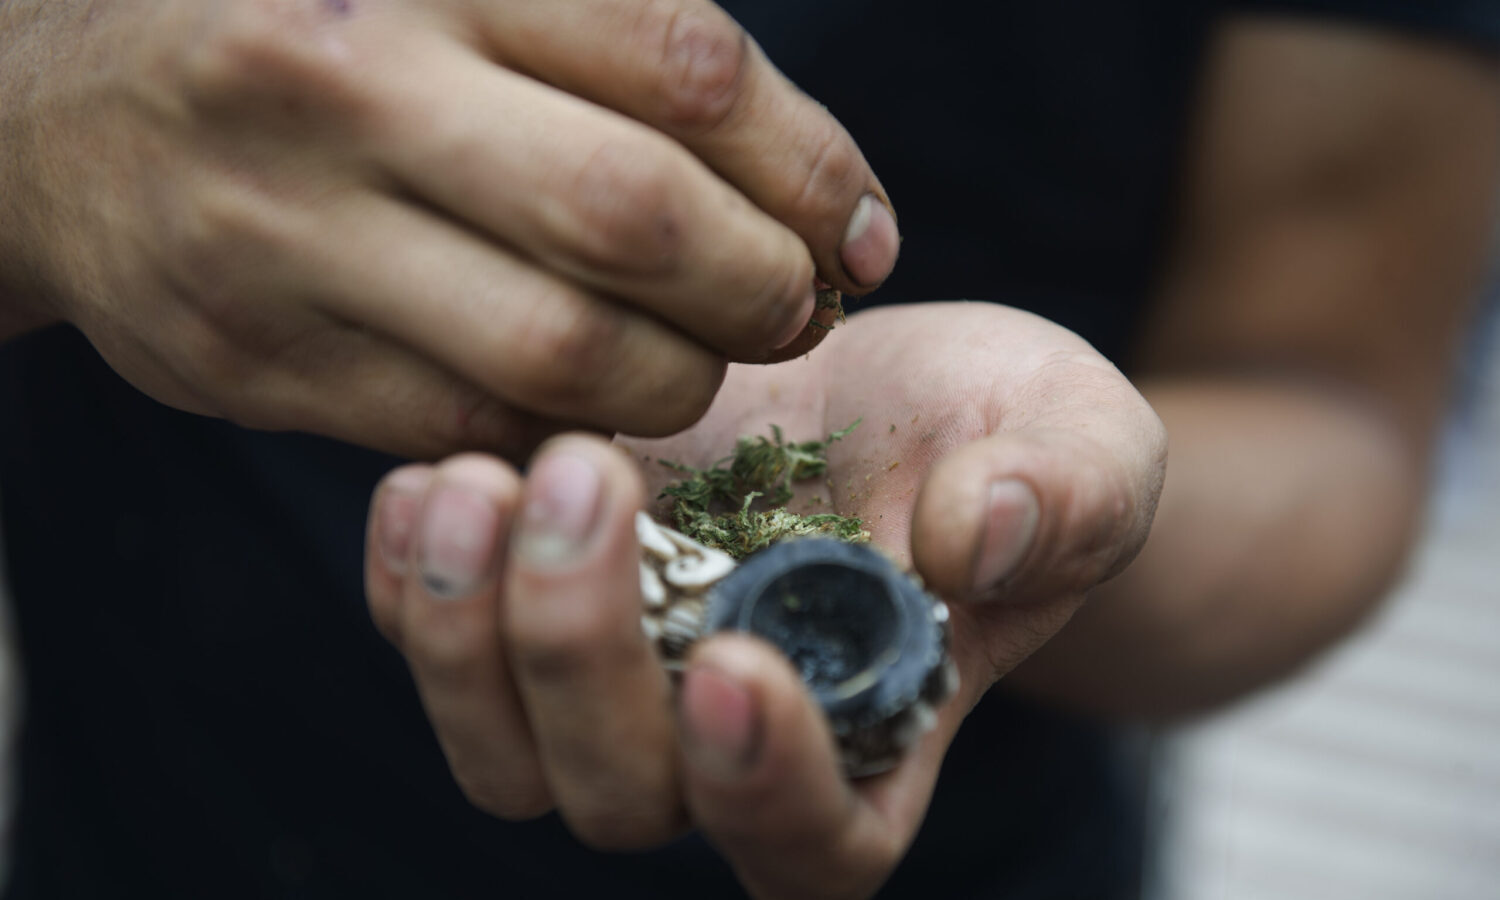 Here's What You Should Know About Synthetic Marijuana